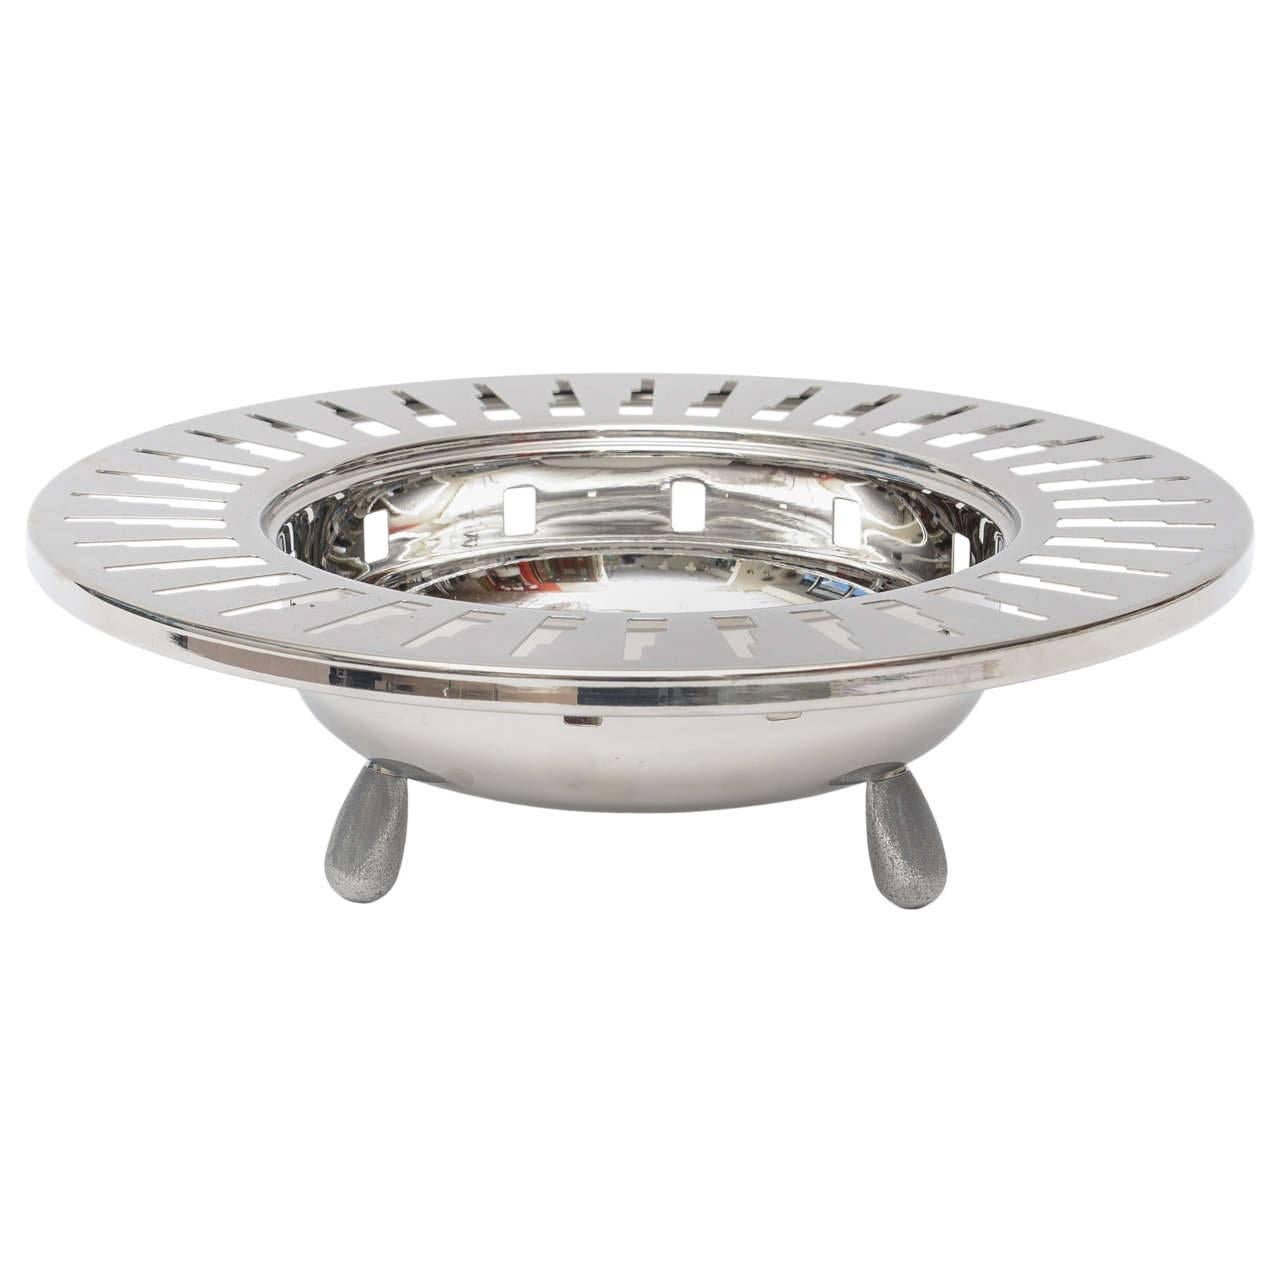 Italian Alessi Stainless Steel Cutout Skyscraper Footed Bowl